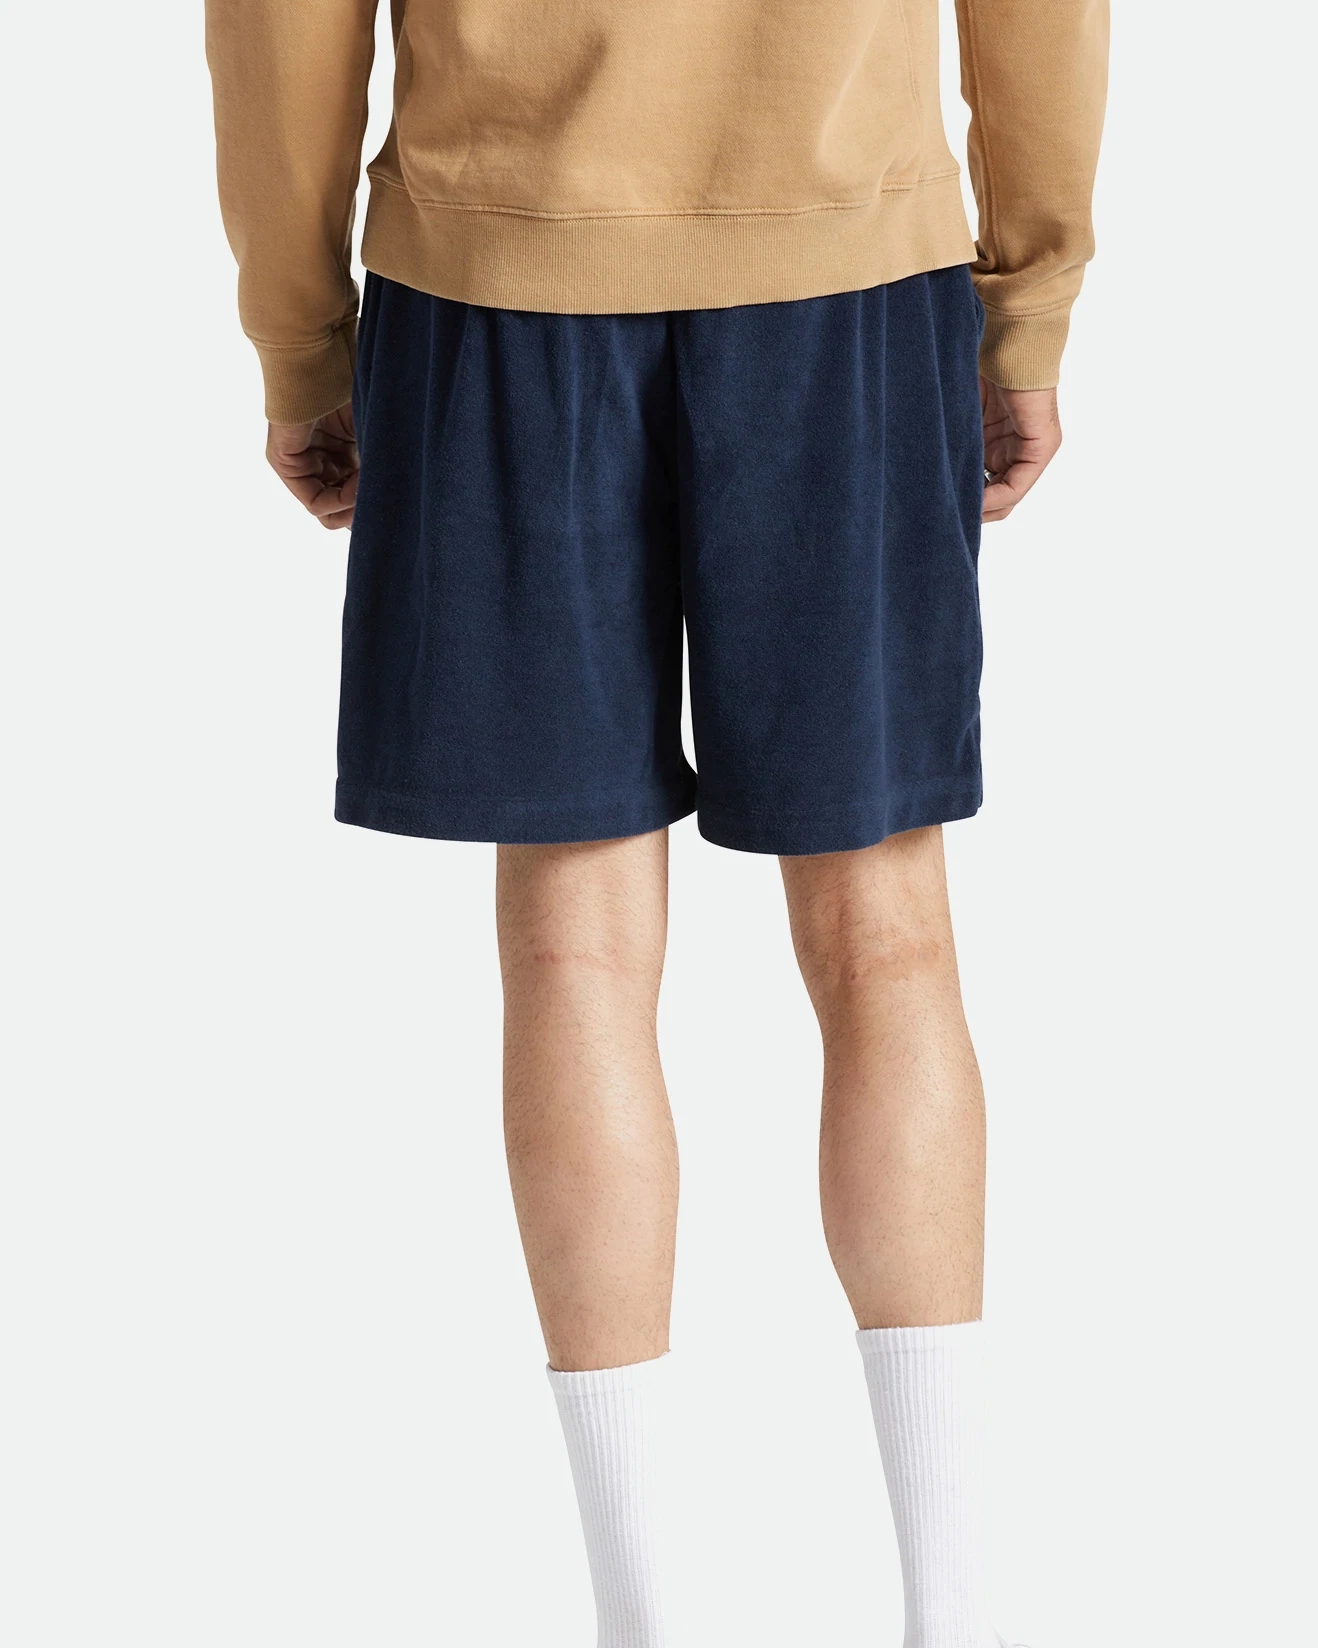 Pacific Reserve Terry Cloth - Navy